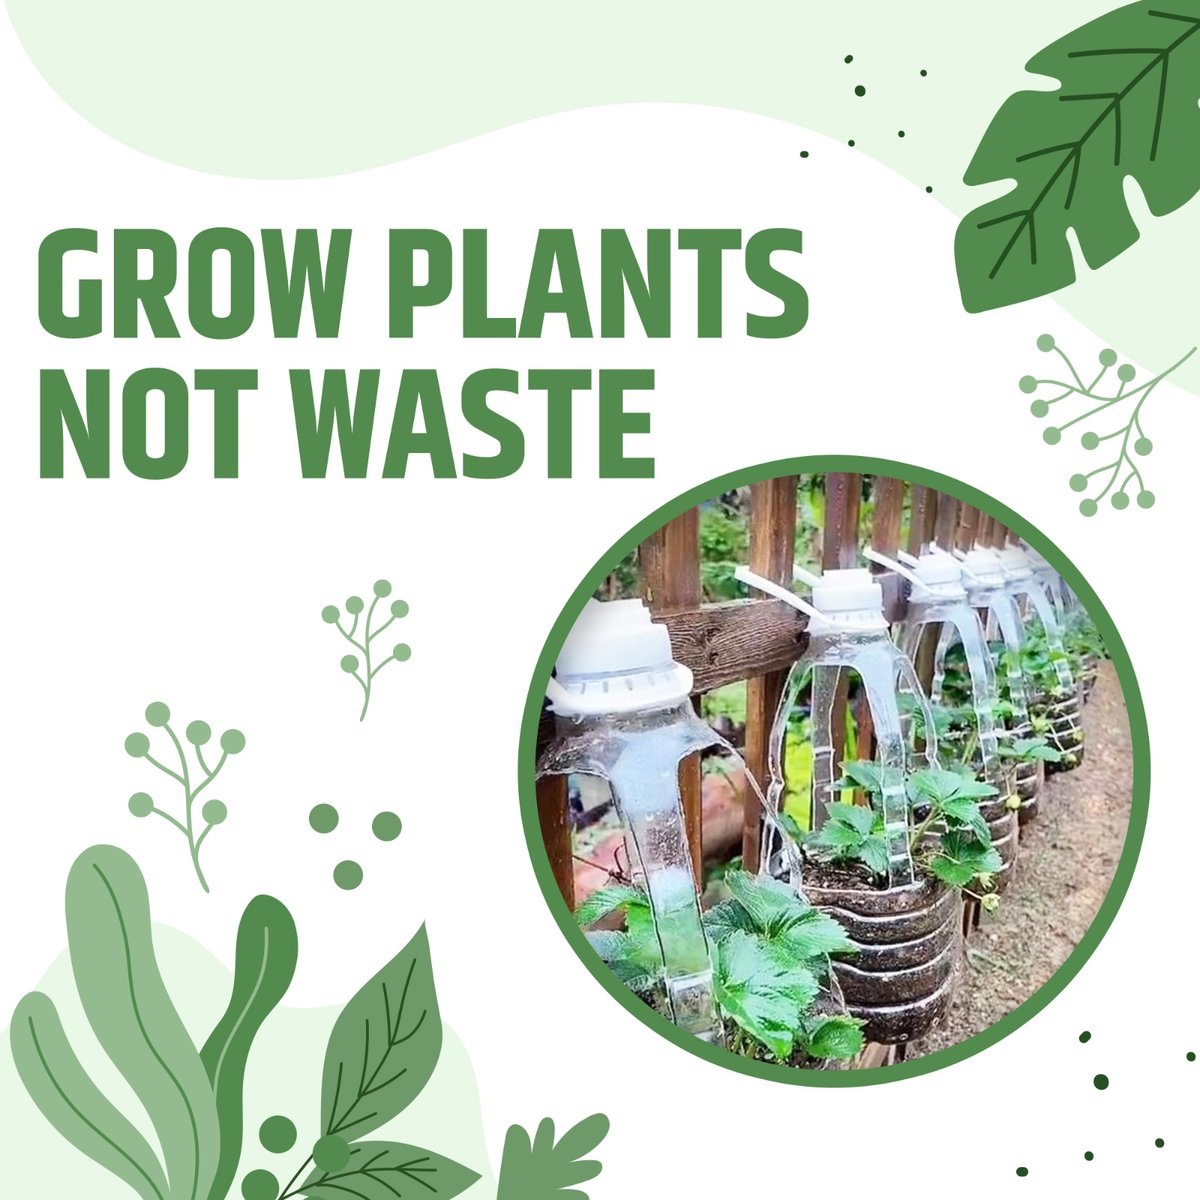 Let's cultivate greenery, not garbage. Reduce waste, and grow plants. #CleanIndiaGreenIndia